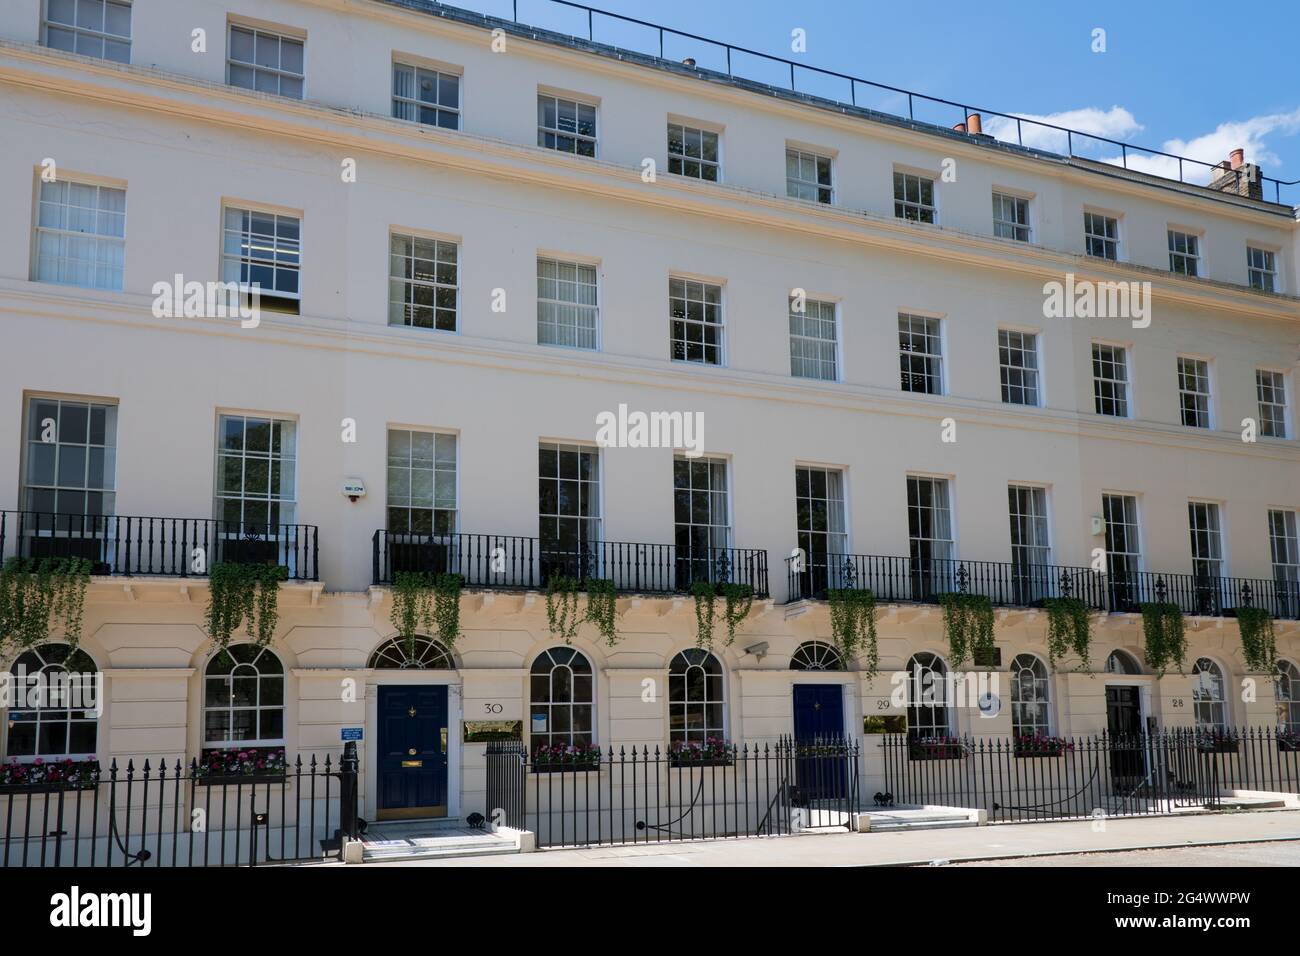 Beautiful terrace houses Conway Street west side Fitzroy Square Central London England Stock Photo